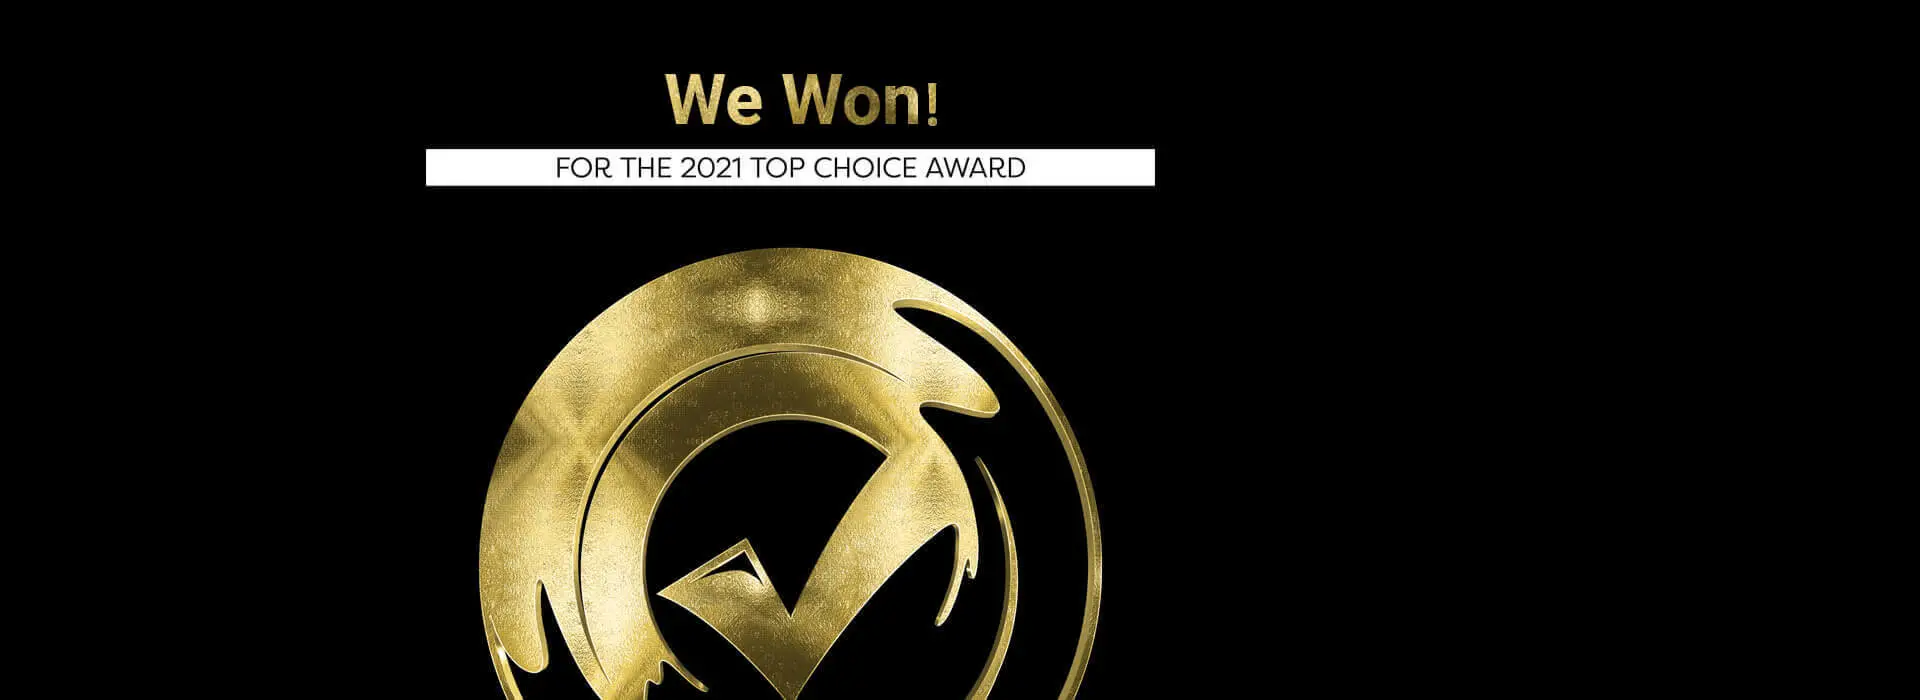 Lifetime Smiles is proud to announce that we won the 2021 Top Choice Award Nominee!